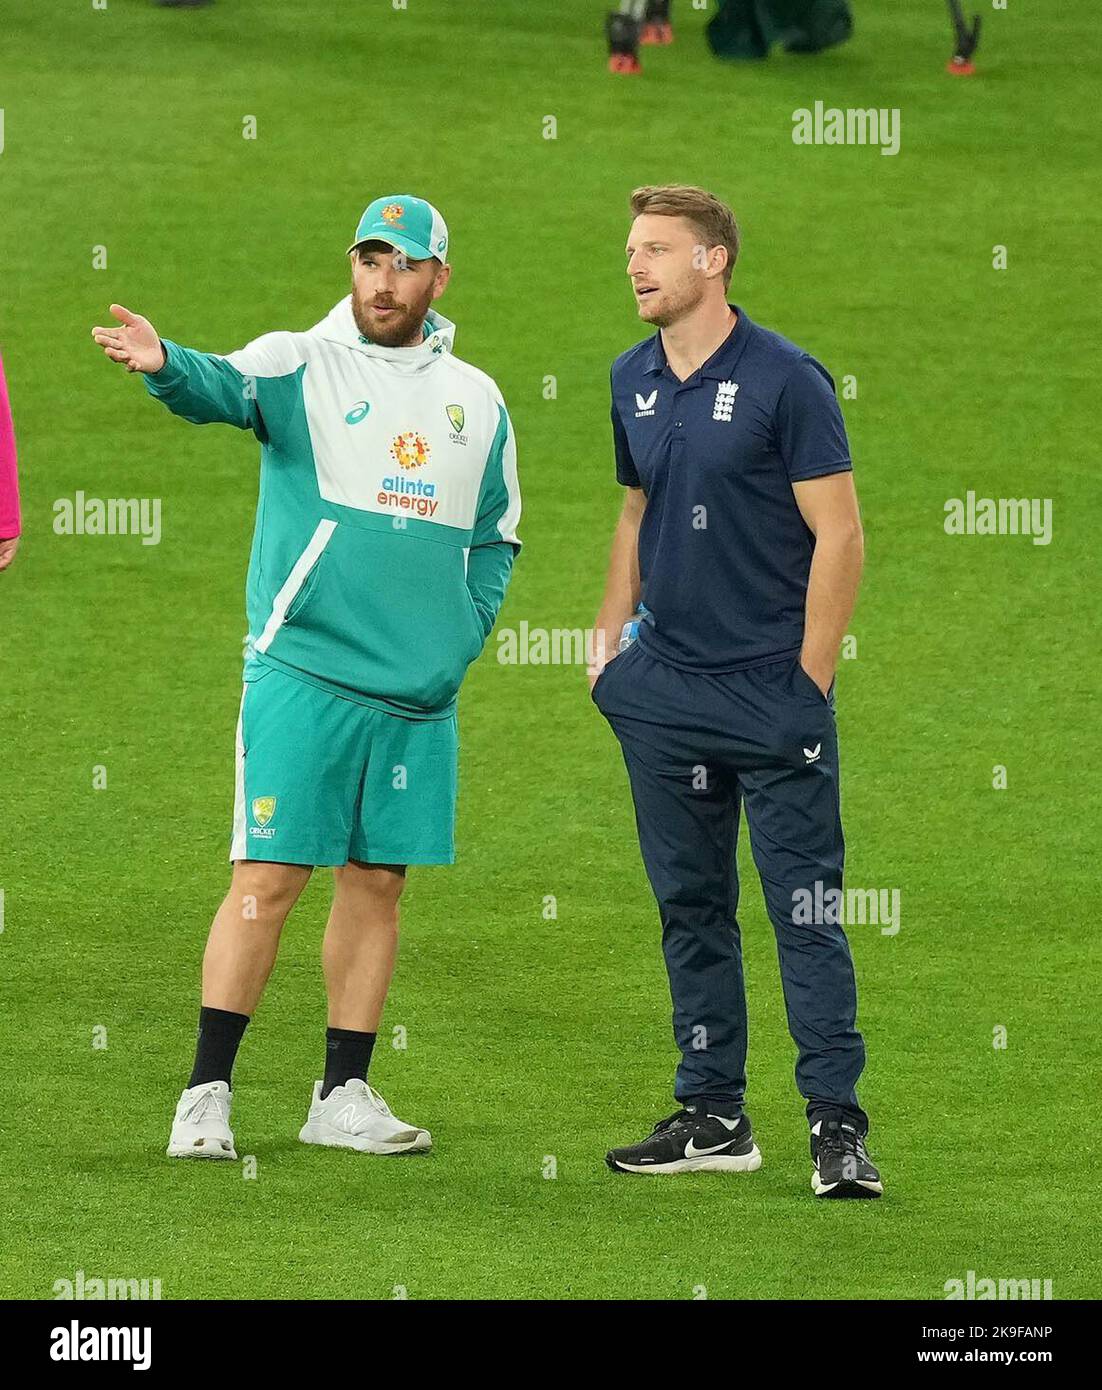 Australia's Aaron Finch (left) and England's Jos Buttler talk after the umpires inspected the outfield ahead of the T20 World Cup Super 12 match at Melbourne Cricket Ground in Melbourne, Australia. Picture date: Friday October 28, 2022. Stock Photo